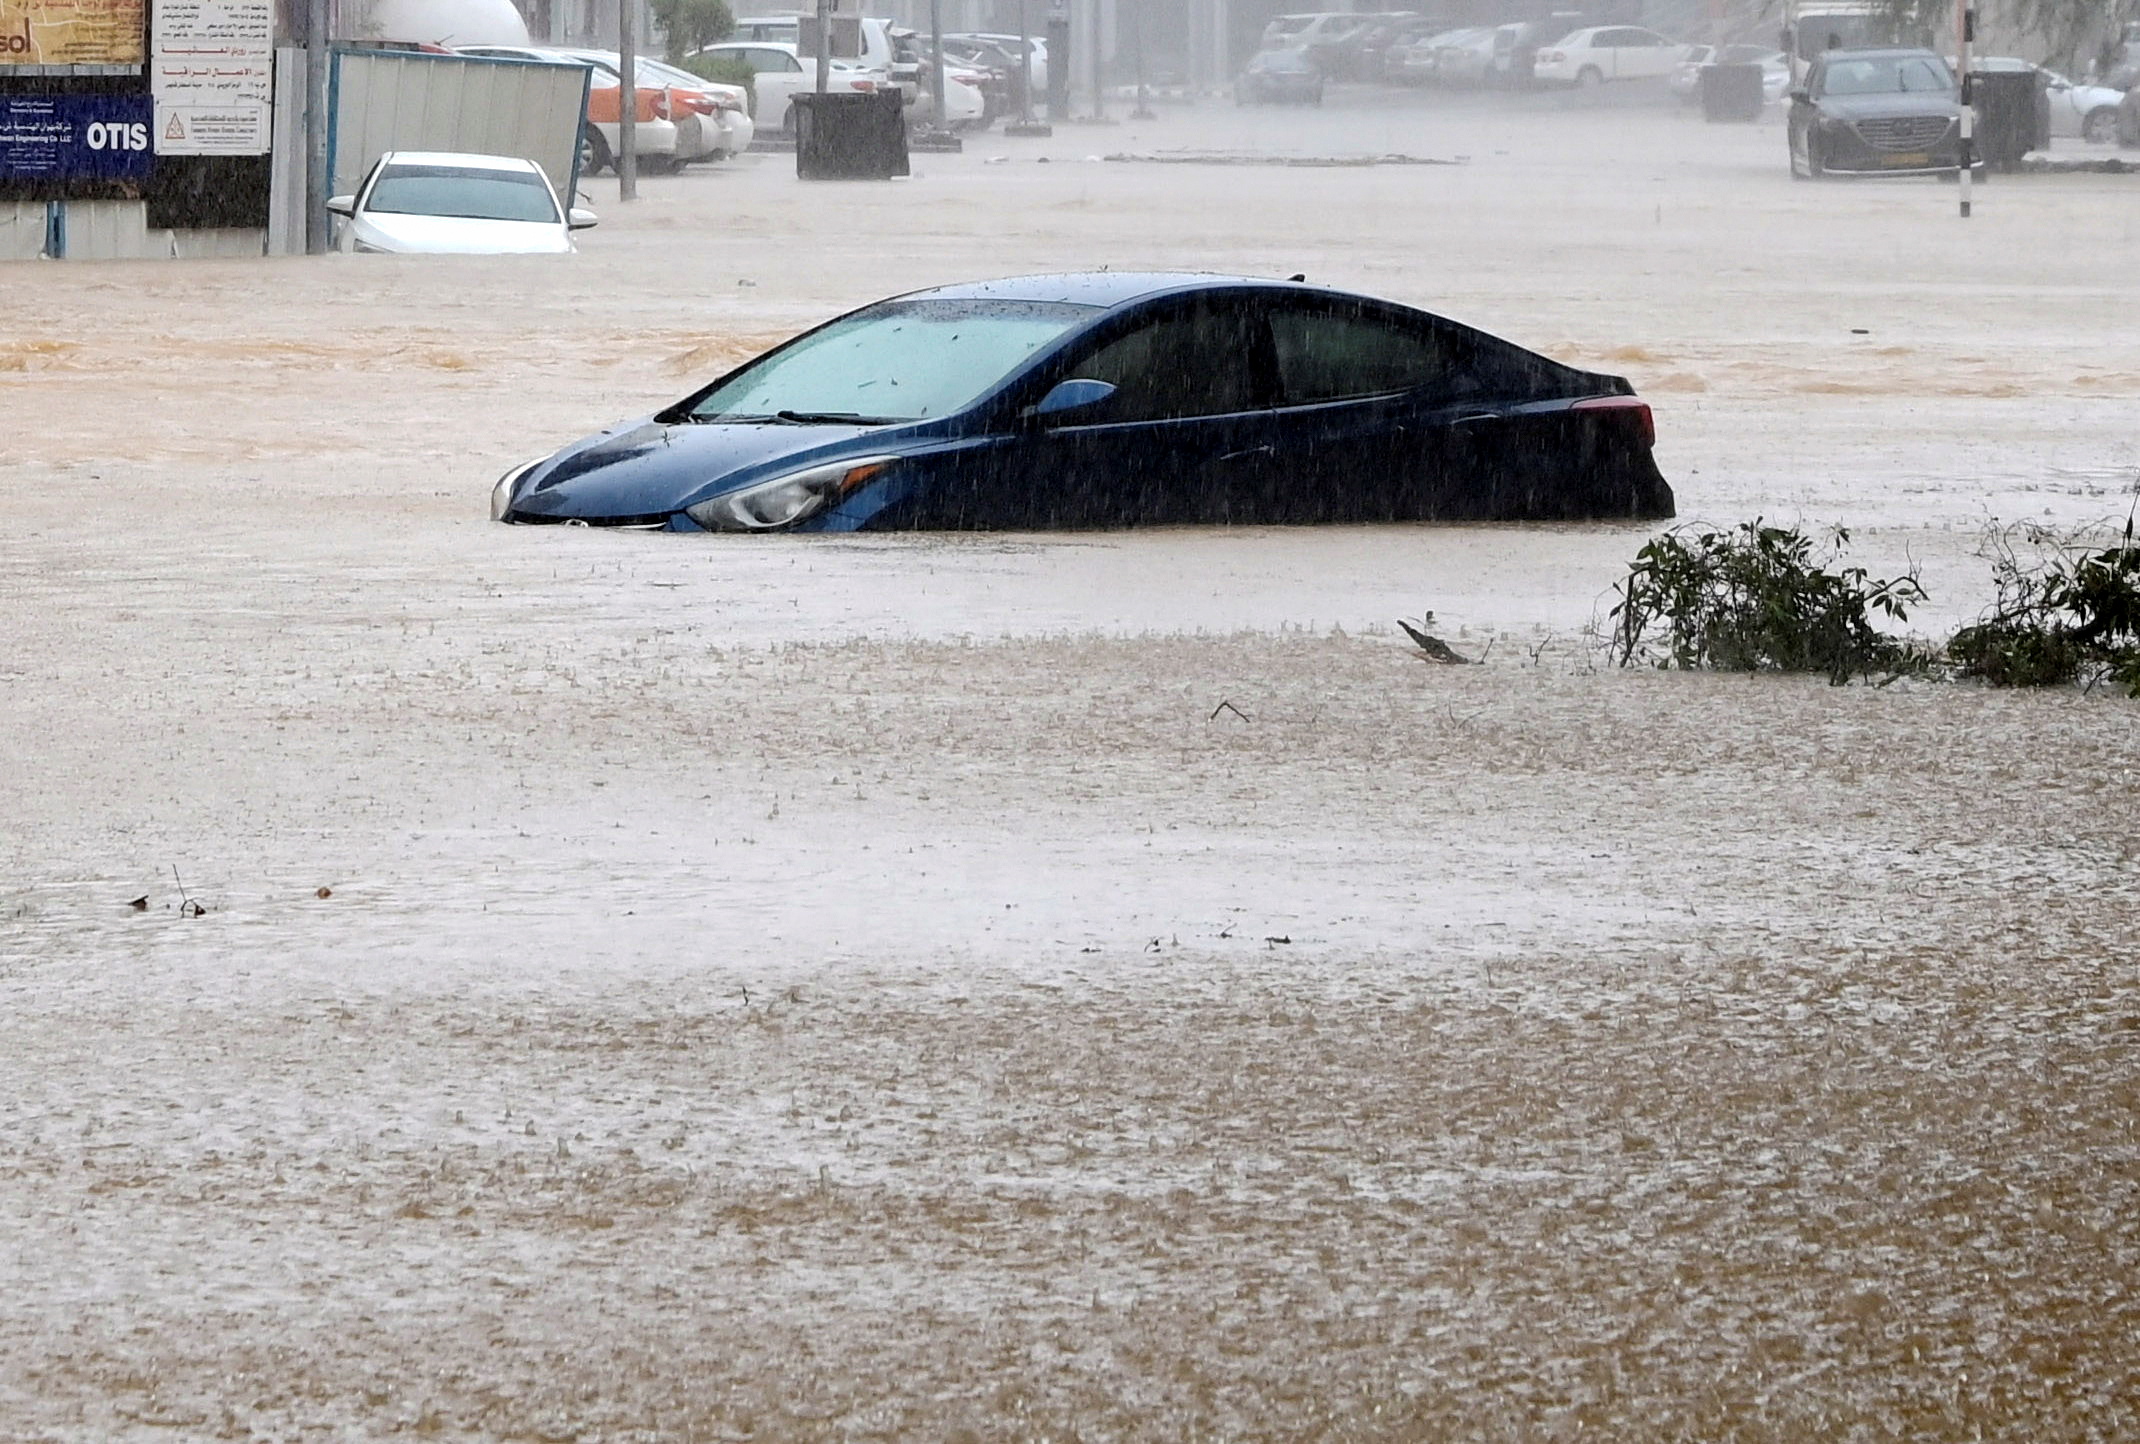 A car is partially submerged on a flooded street as Cyclone Shaheen makes landfall in Muscat Oman, October 3, 2021. REUTERS/Sultan Al Hassani